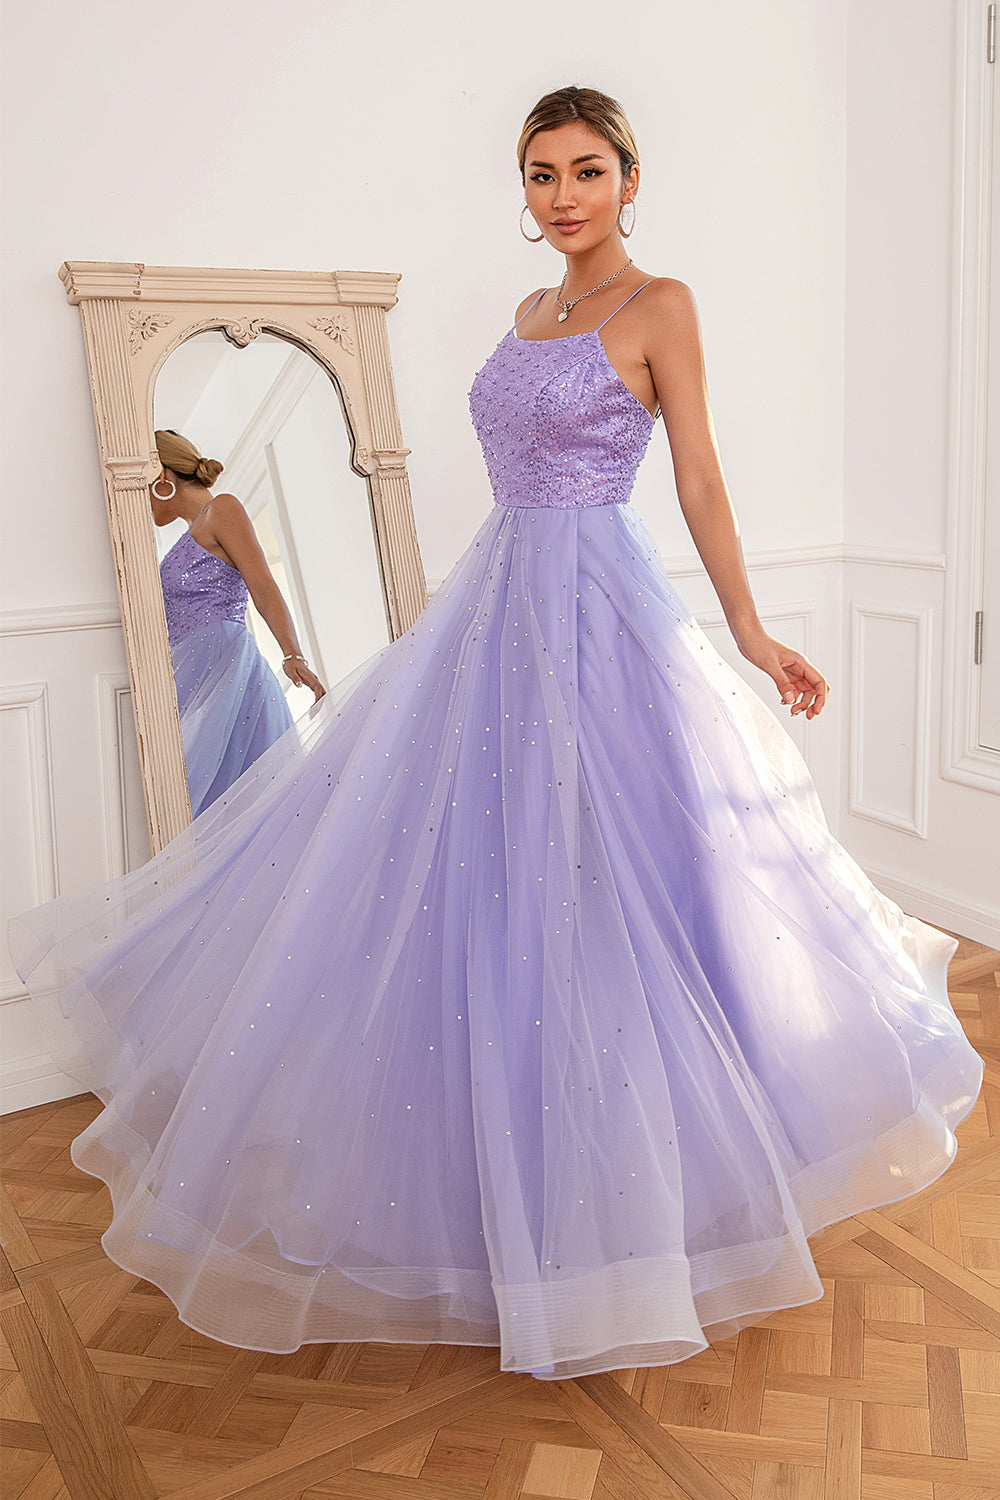 Embroidered Georgette Tiered Dress in Light Purple : TWJ4849